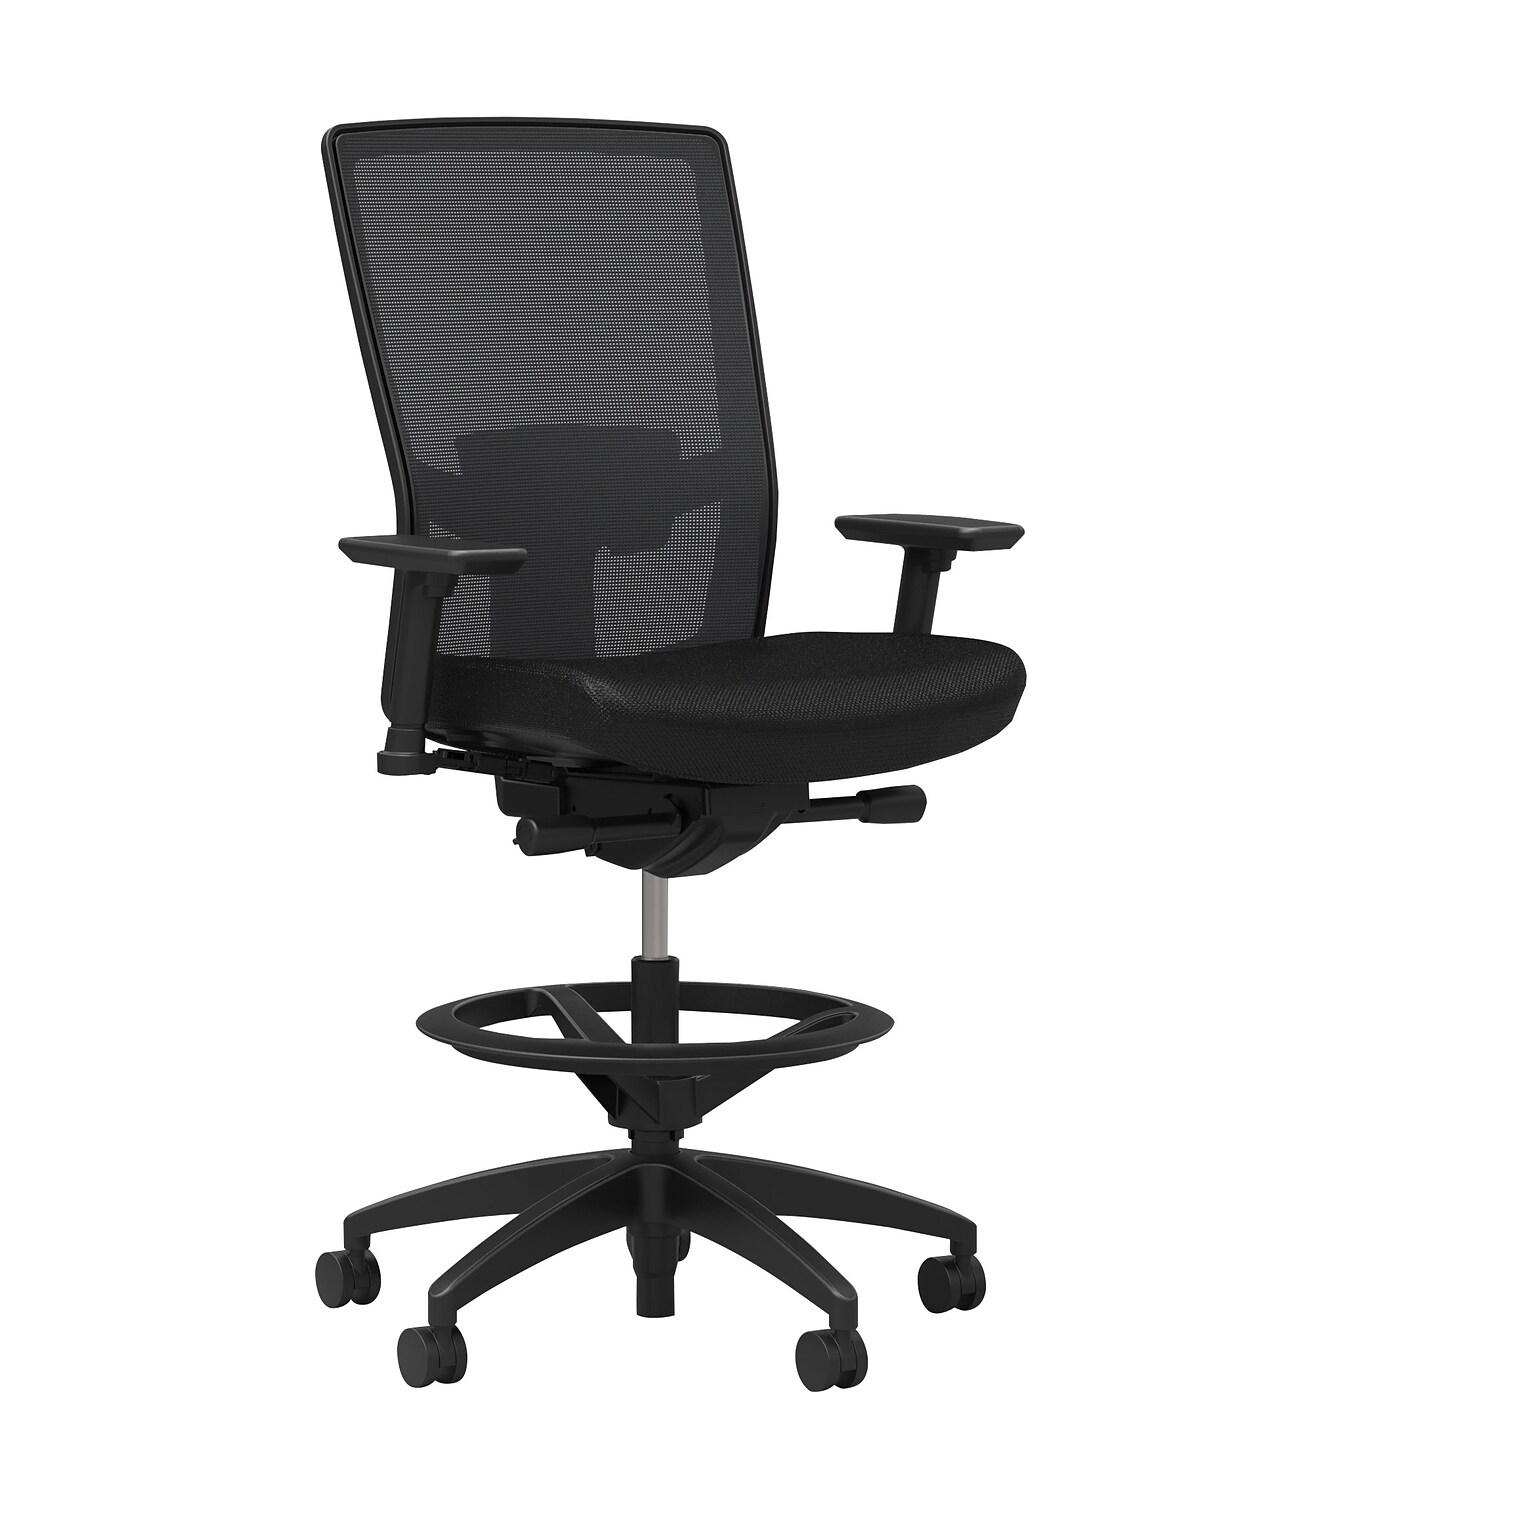 Union & Scale™ Workplace2.0 500 Series Mesh and Fabric Stool with Adjustable Lumbar Support, Black (51975)